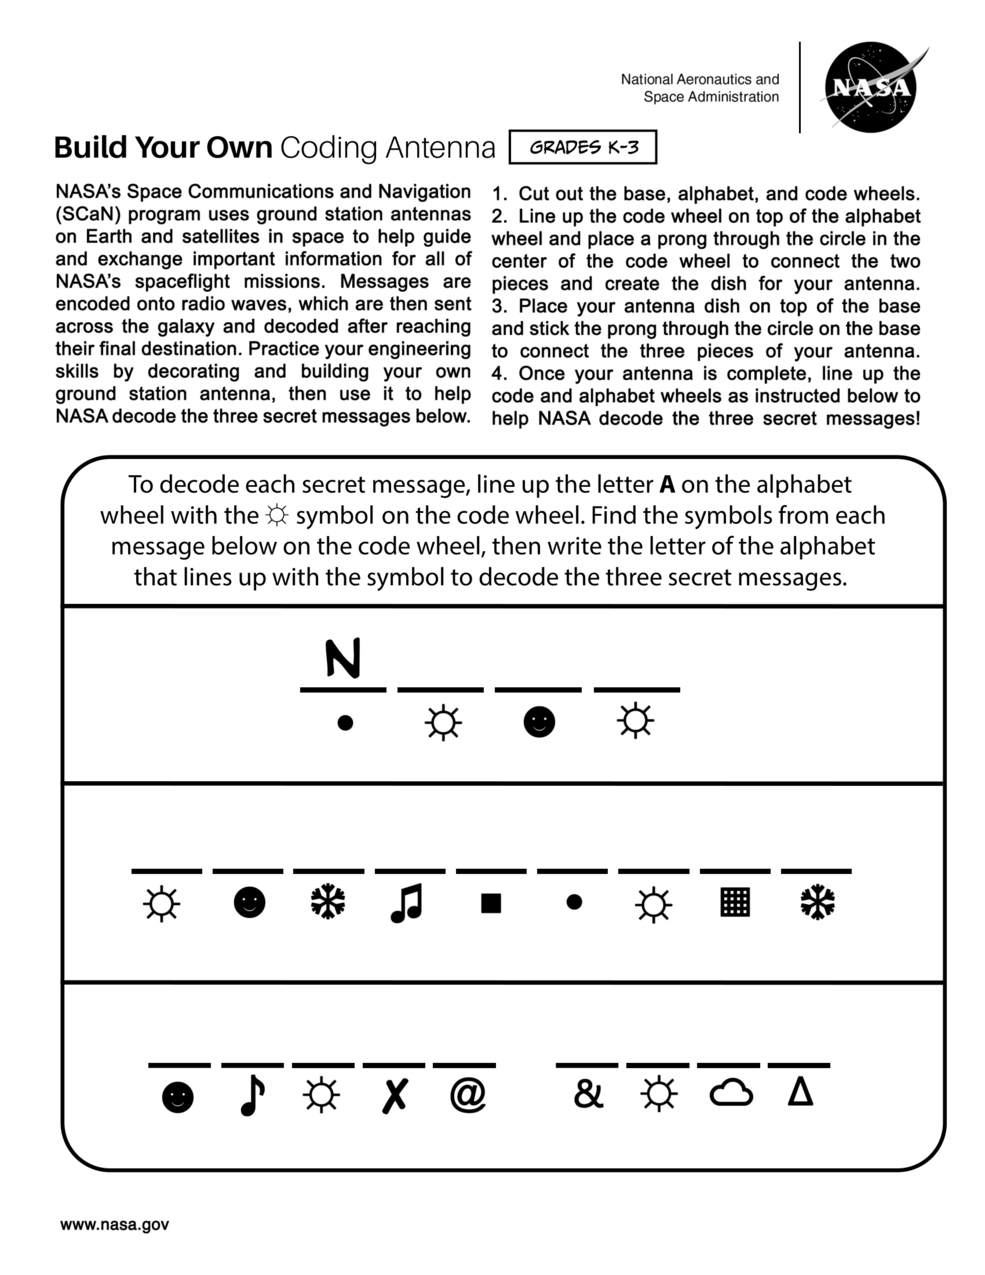 Front page of the Build Your Own Coding Activity for grades kindergarten through third. On the the top half of the page is block of text with directions for how to complete the activity. The bottom half of the page is part of the activity.